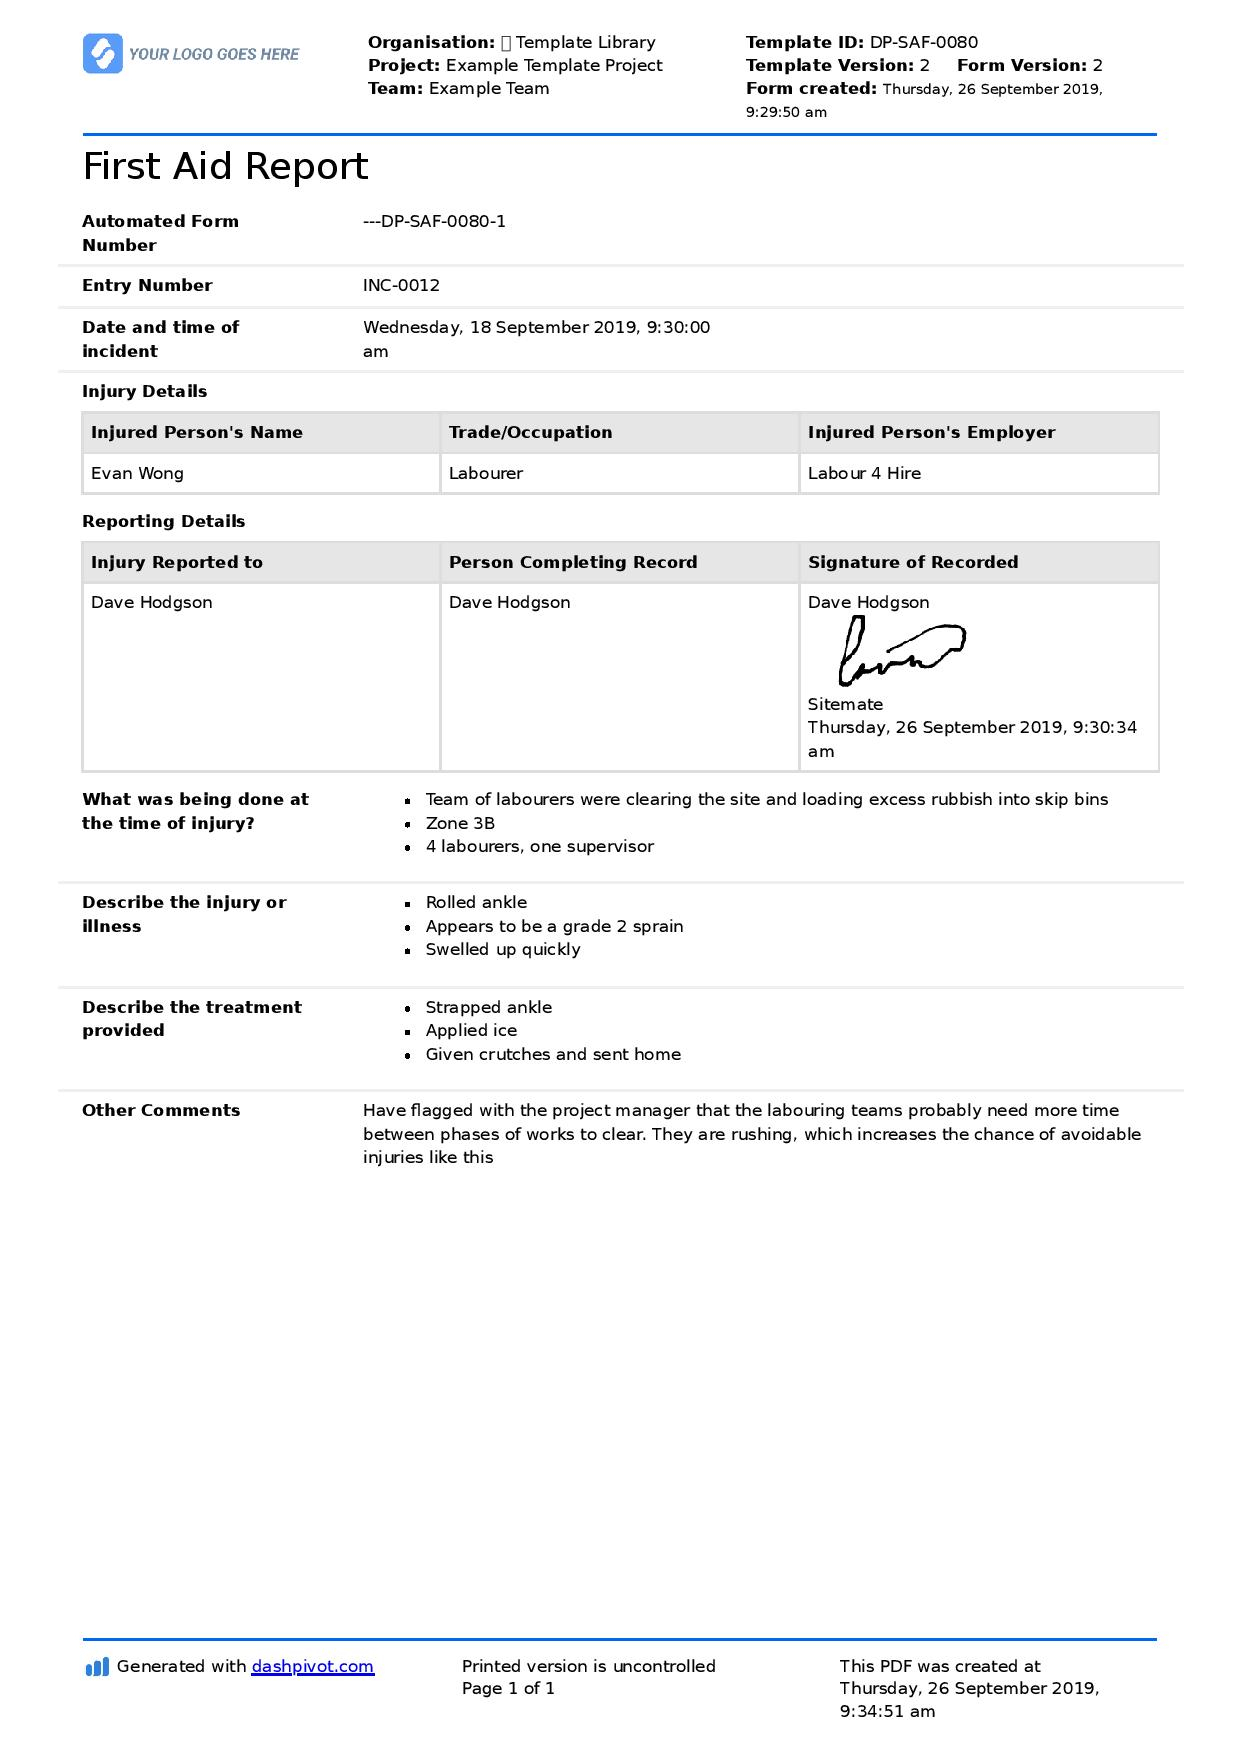 First Aid Report Form Template (Free To Use, Better Than Pdf) With First Aid Incident Report Form Template